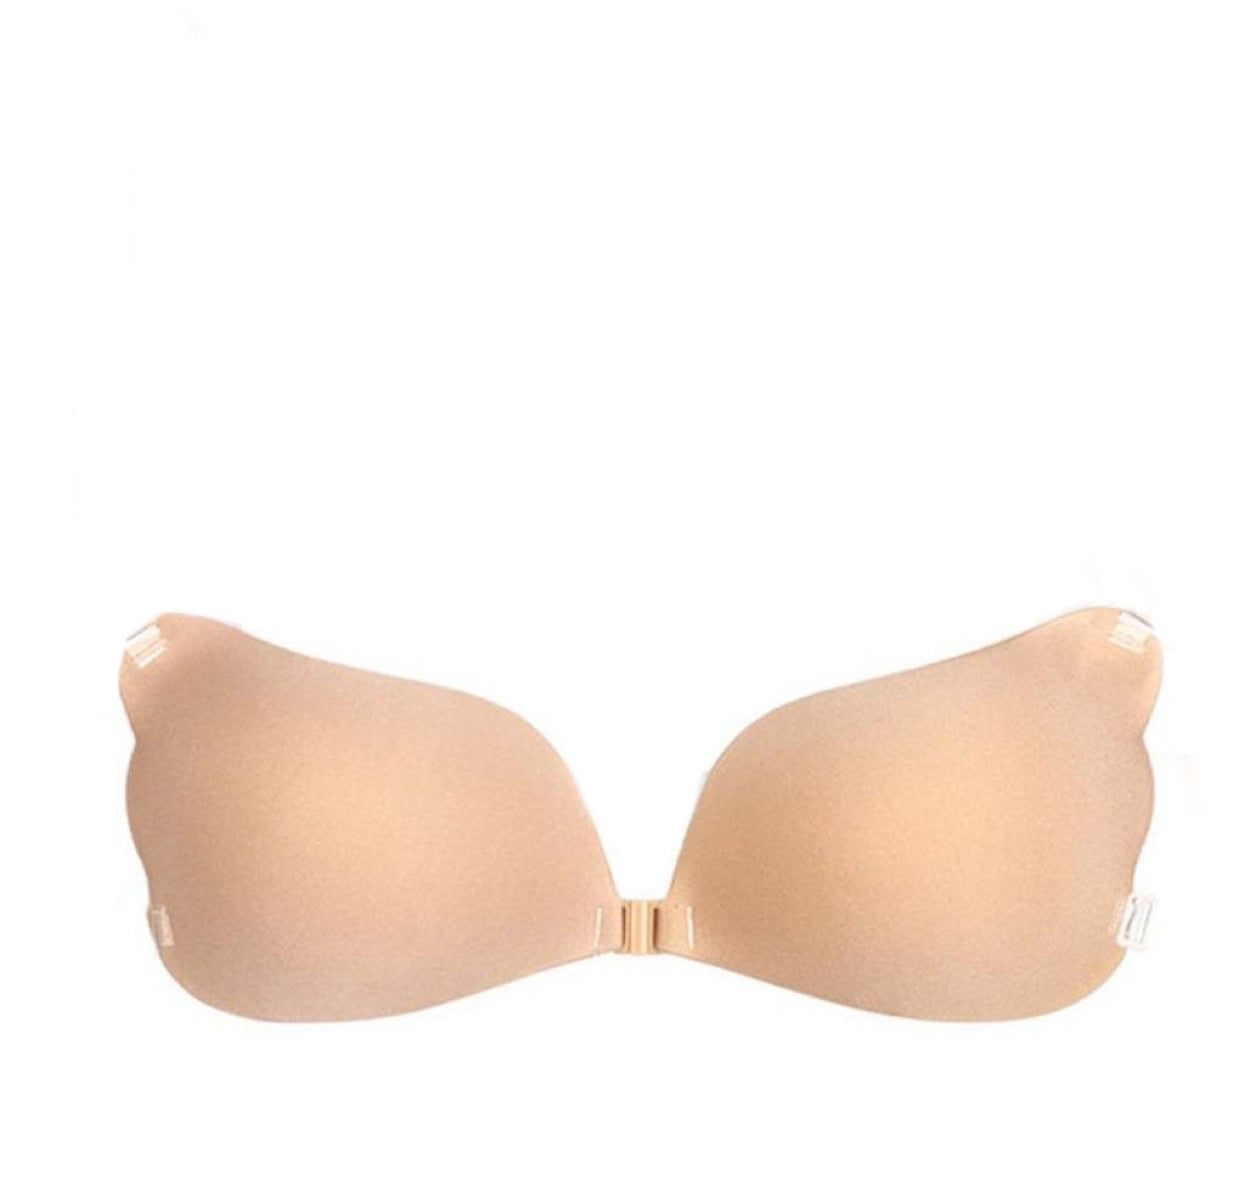 BONDS Invisi Full Busted T-Shirt Bra, YXC4Y